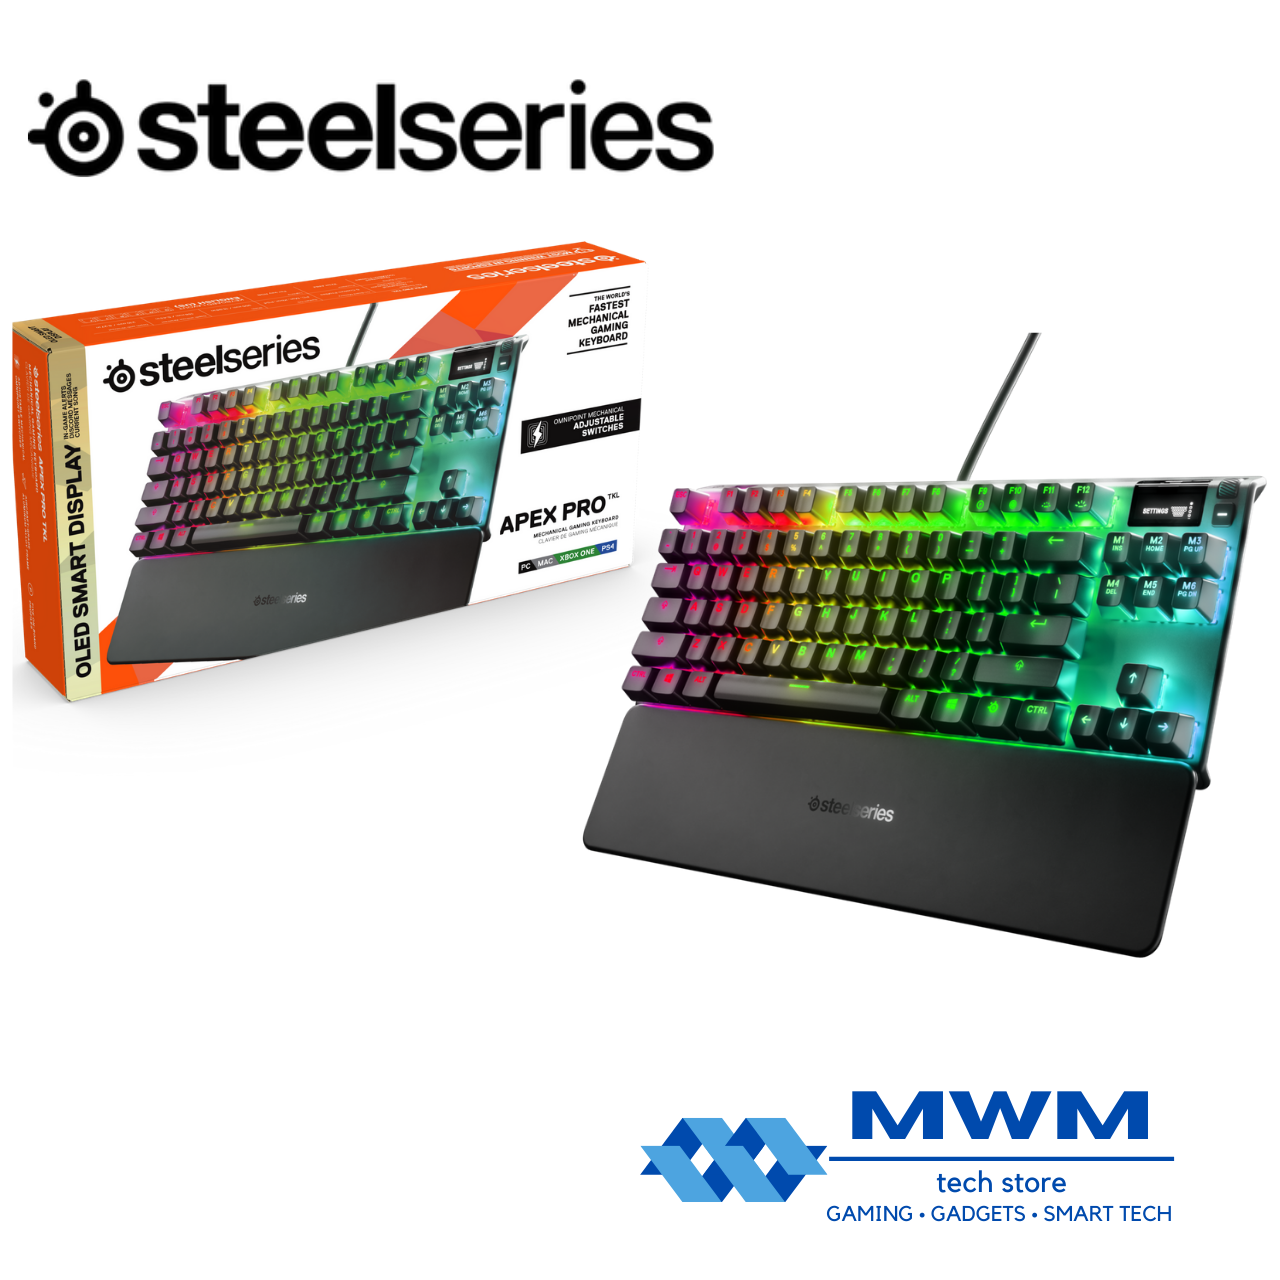 Steelseries Apex Pro Tkl Mechanical Gaming Keyboard Adjustable Actuation Switches Rgb Led Backlit Oled Display Great Alternative To Razer Redragon Logitech tech Hp Fantech Asus Acer Havit Gigaware